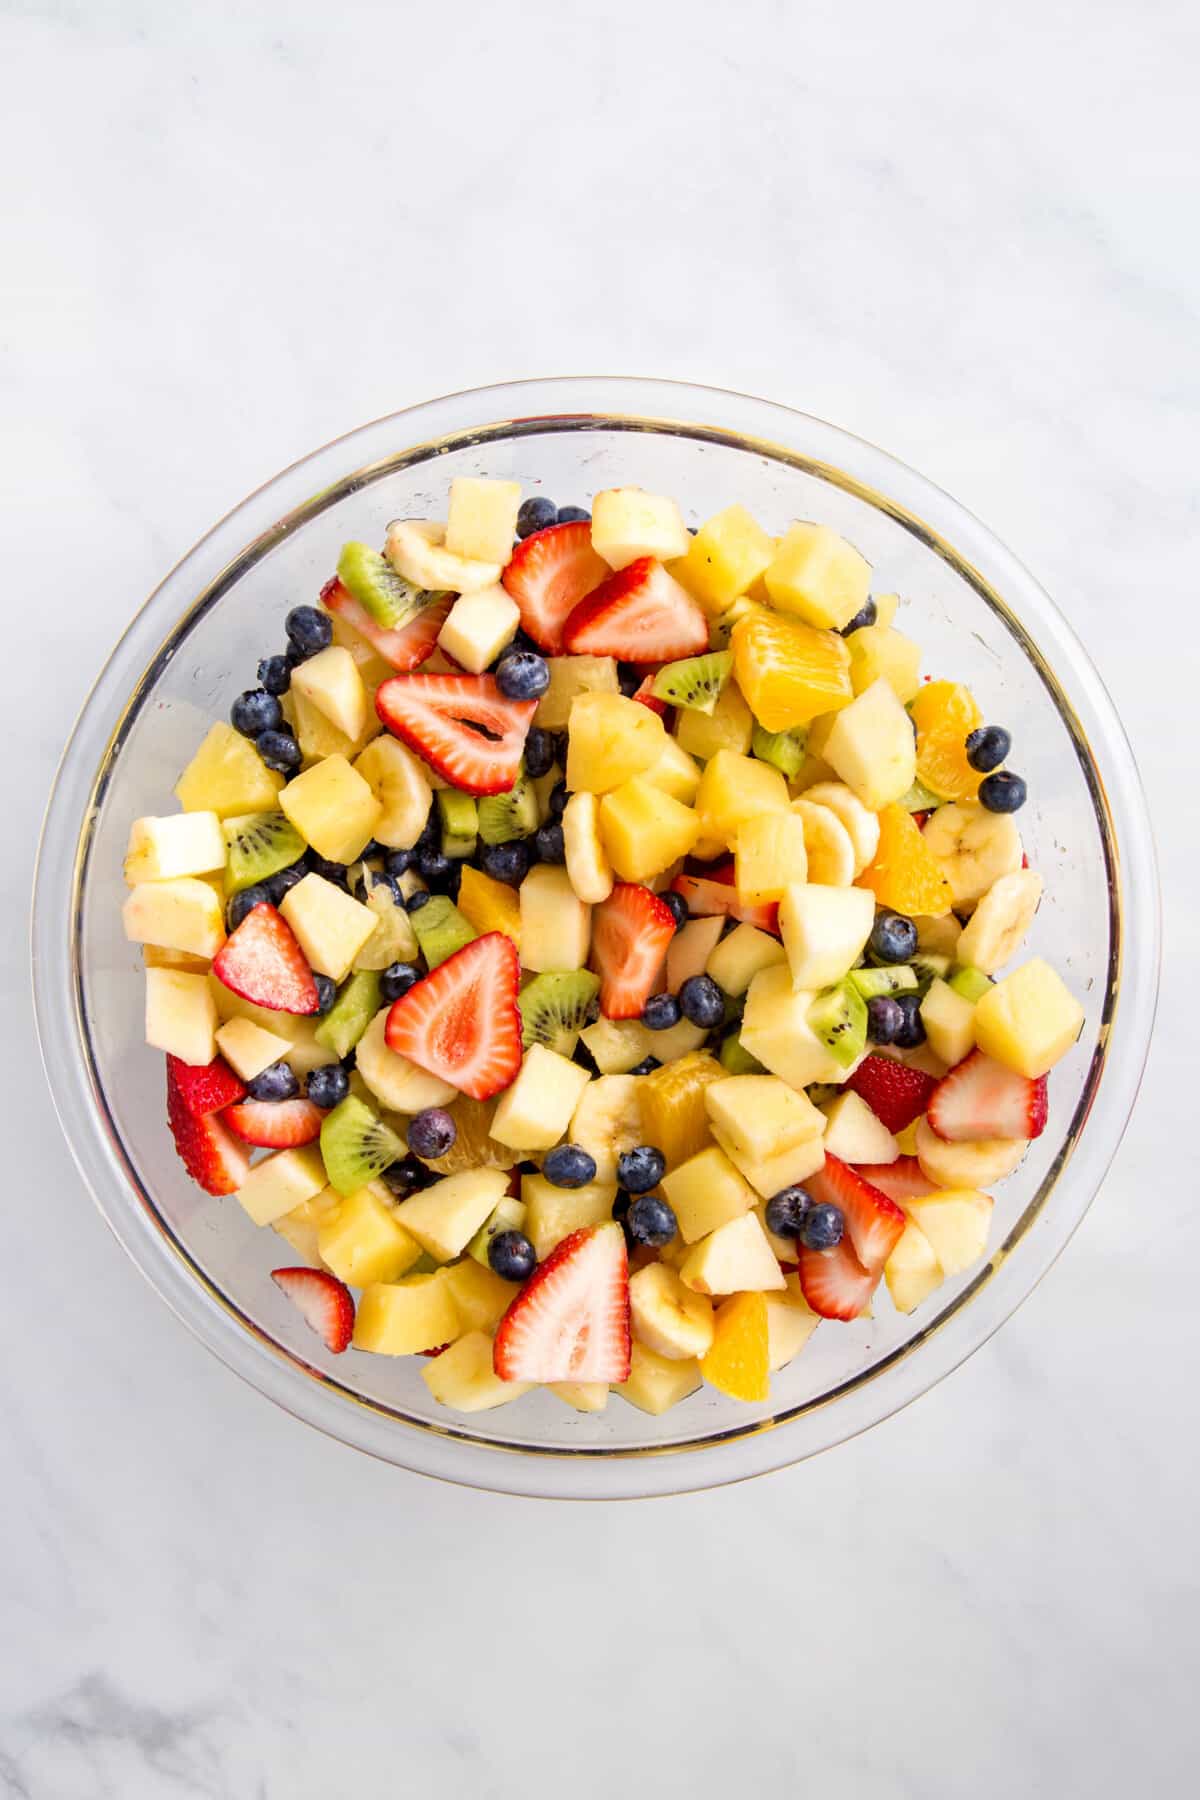 cut up strawberries, bananas, kiwi, oranges, pineapple, and fresh blueberries in a large glass bowl.